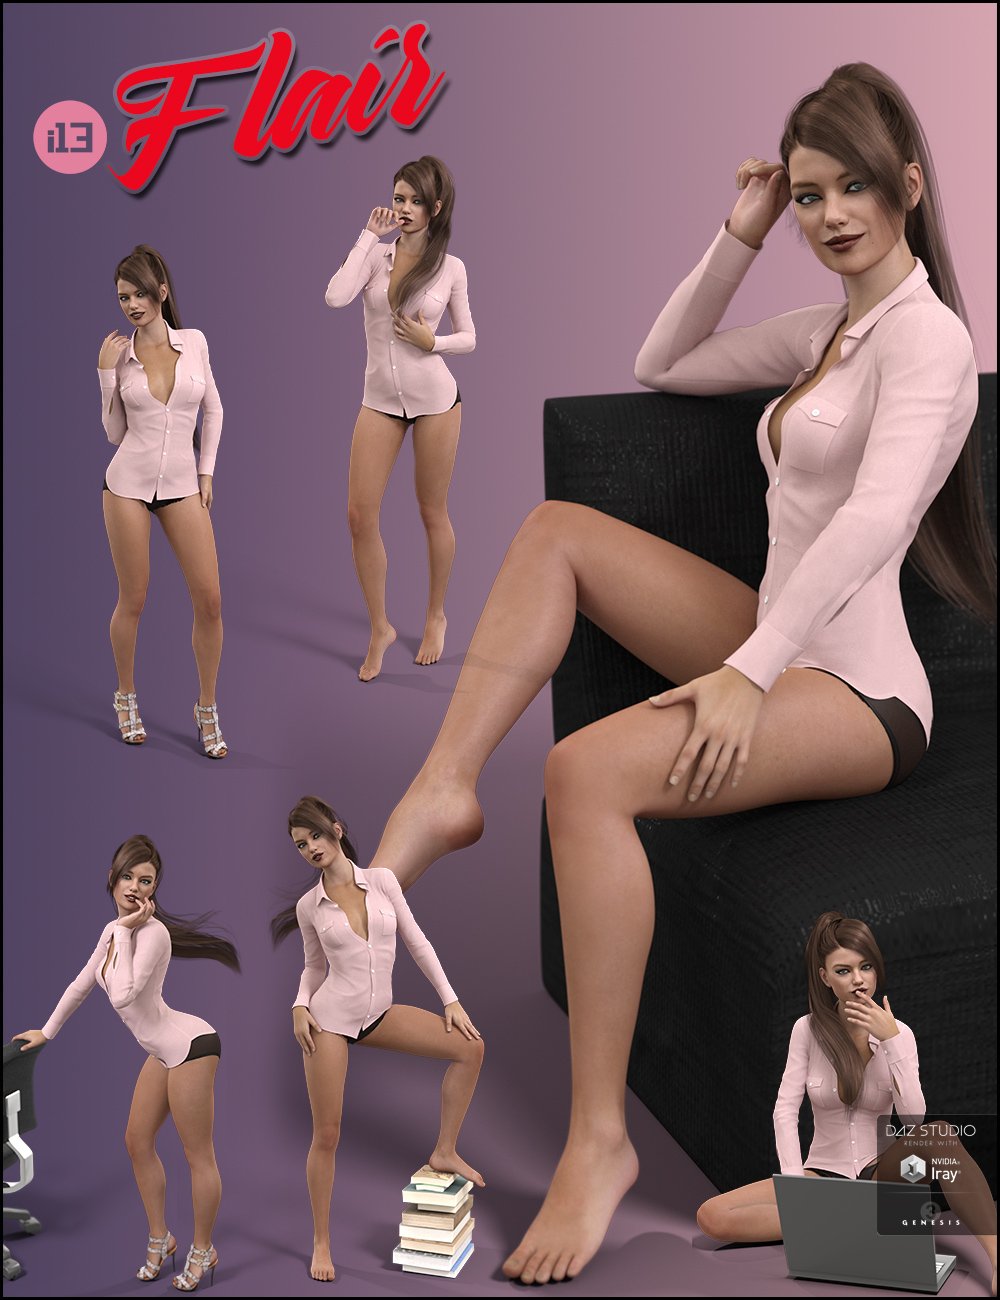 i13 Flair Pose Collection for the Genesis 3 Female(s) by: ironman13, 3D Models by Daz 3D